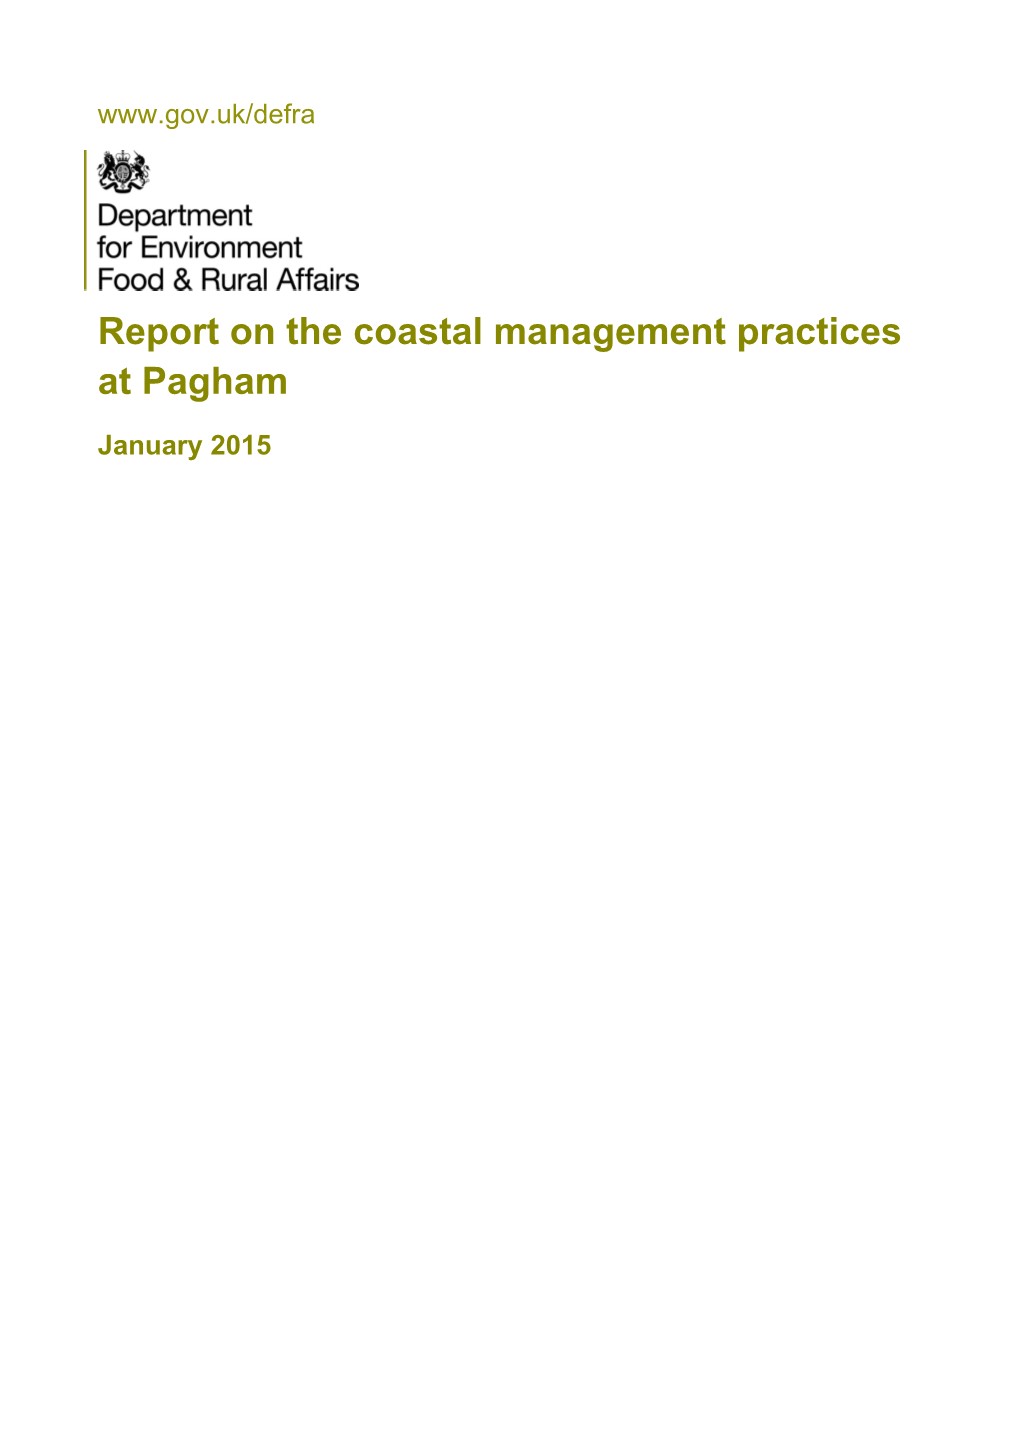 Report on the Coastal Management Practices at Pagham